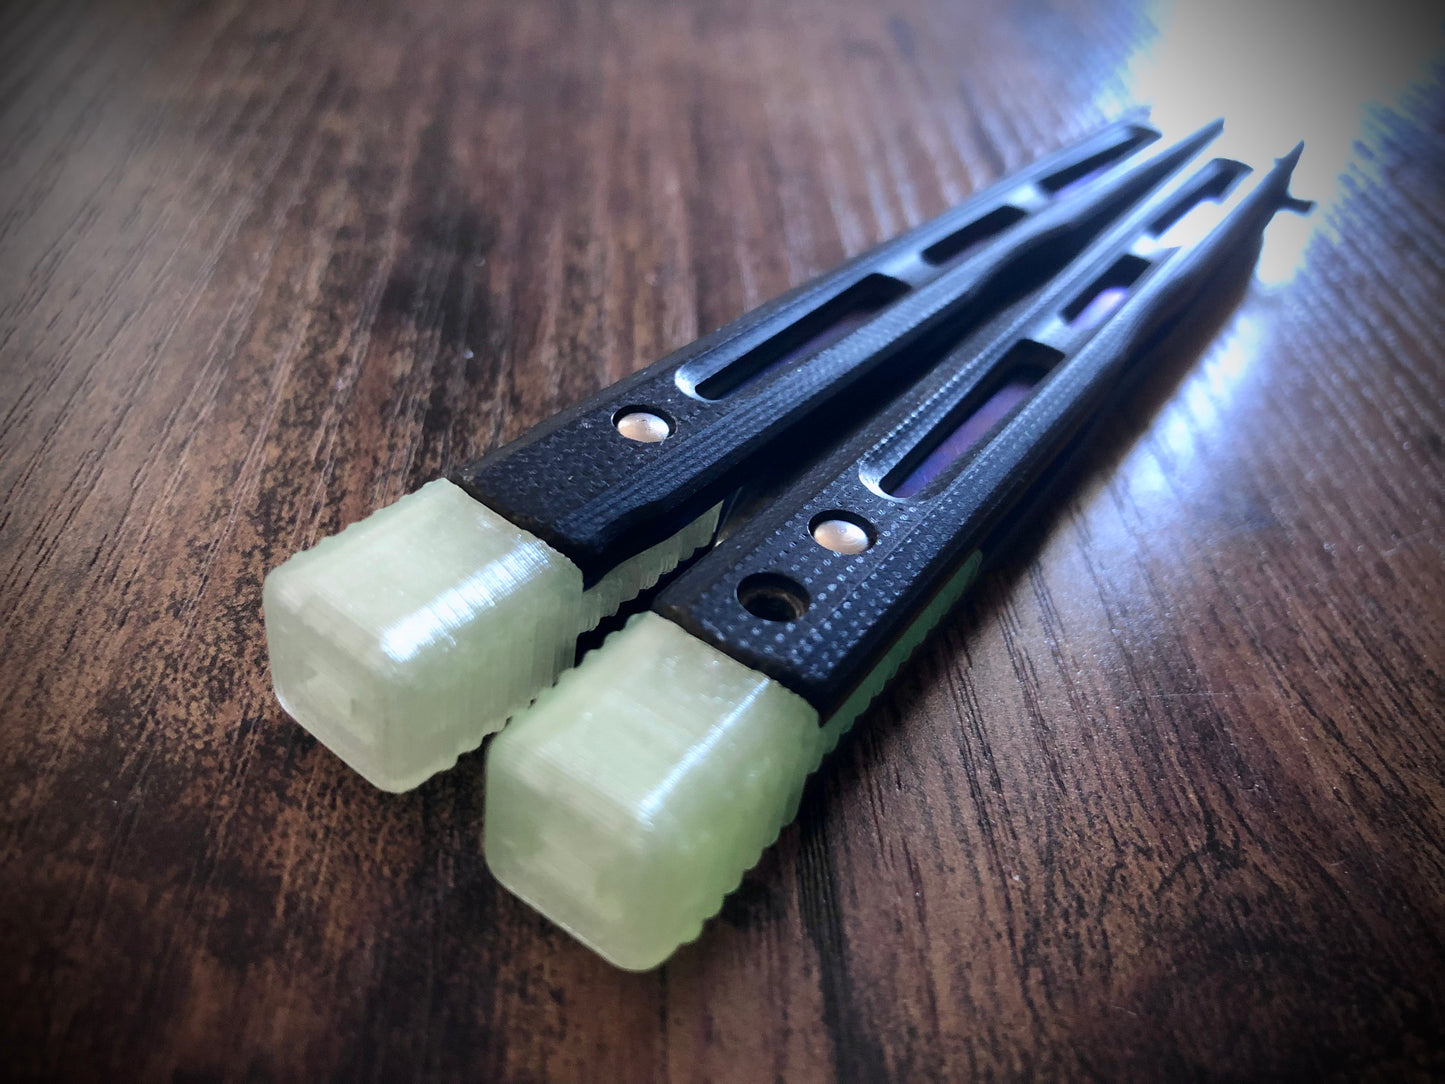 Cousin to Jimpy's discontinued Space Invaders, these Zippy Benchmade 51 spacers are made from a shatter-proof polyurethane with jimping. They extend and protect the handles of the BM 51, and enable adjustable balance with removable tungsten weights.